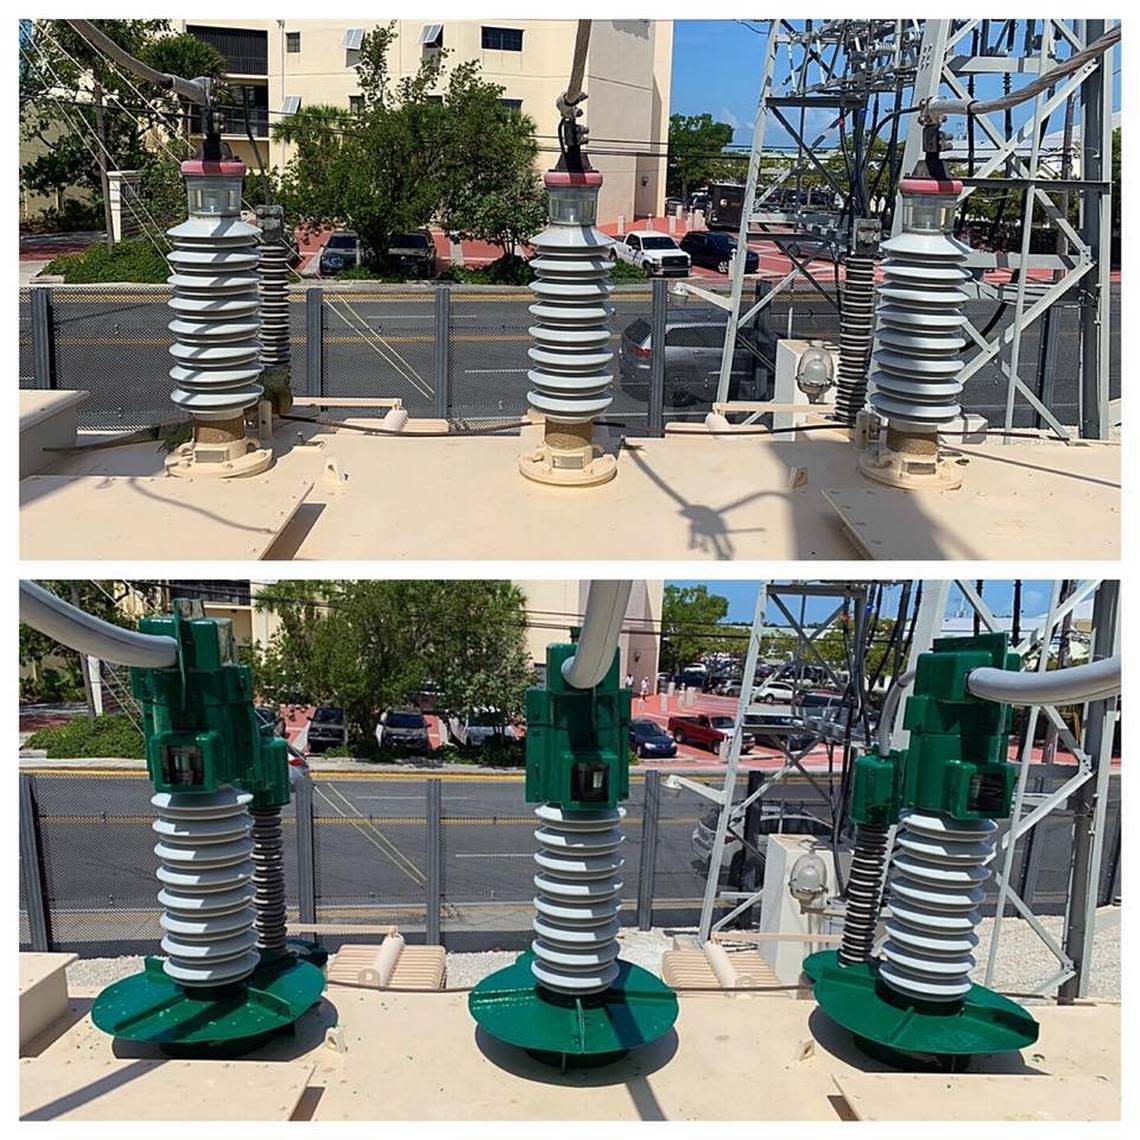 This photo collage shows the Kennedy Drive electrical substation in Key West before (above) and after (below) the Greenjacket pilot program installation in June 2019.